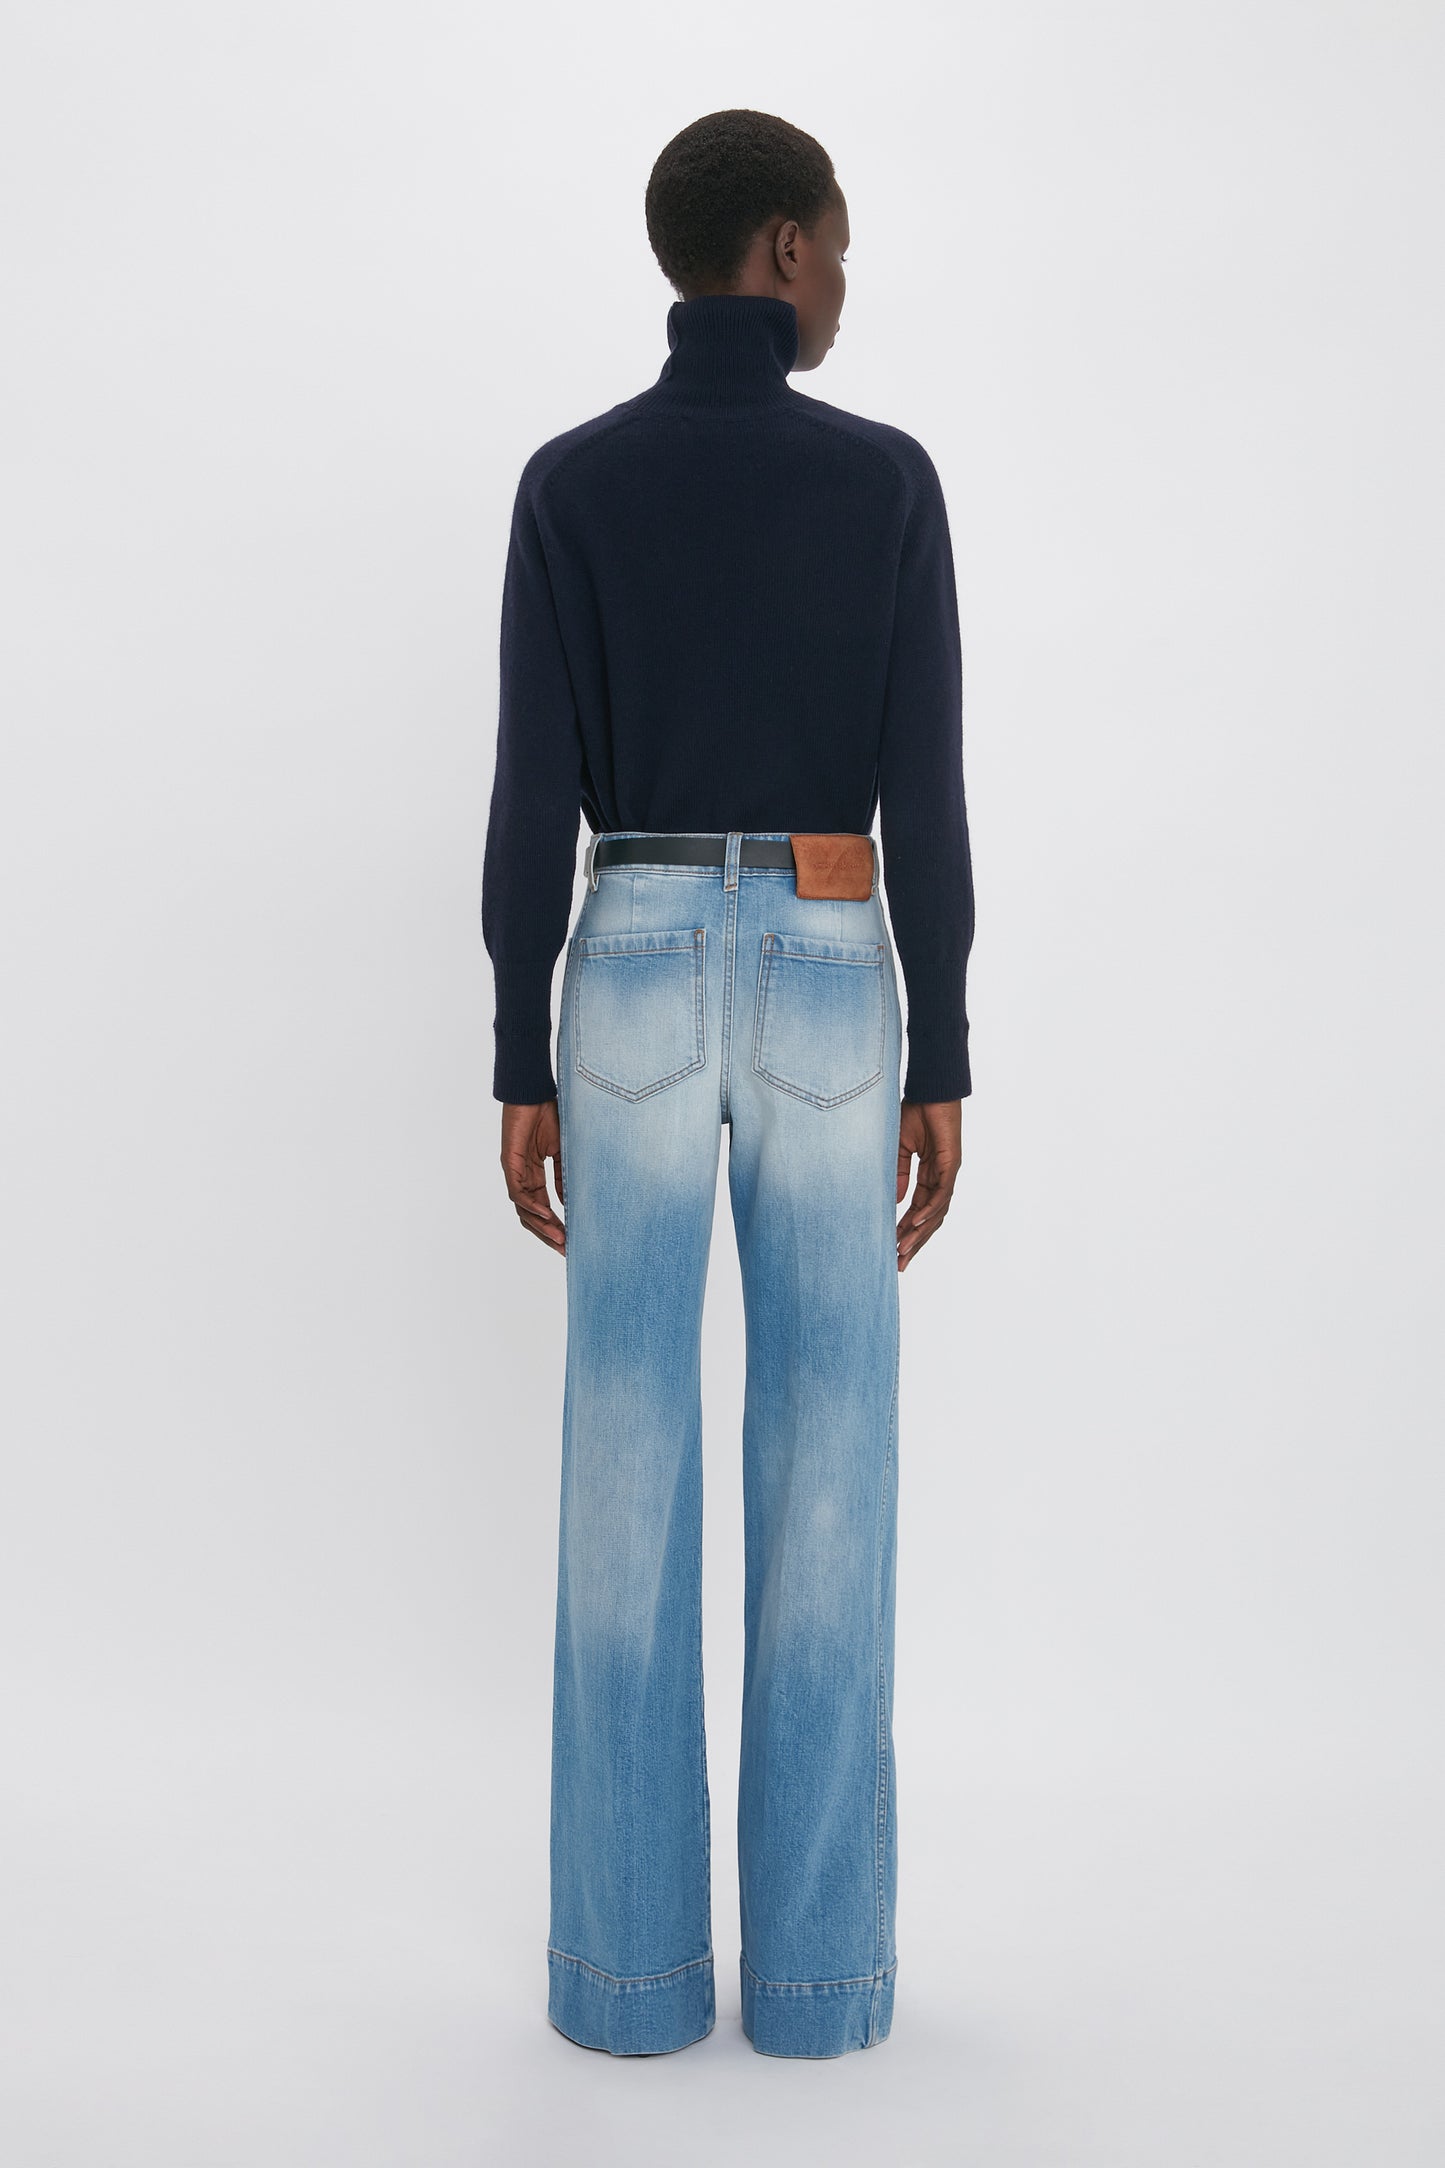 Rear view of a person wearing a dark turtleneck sweater and Victoria Beckham Alina High Waisted Jean In Light Summer Wash against a plain white background.